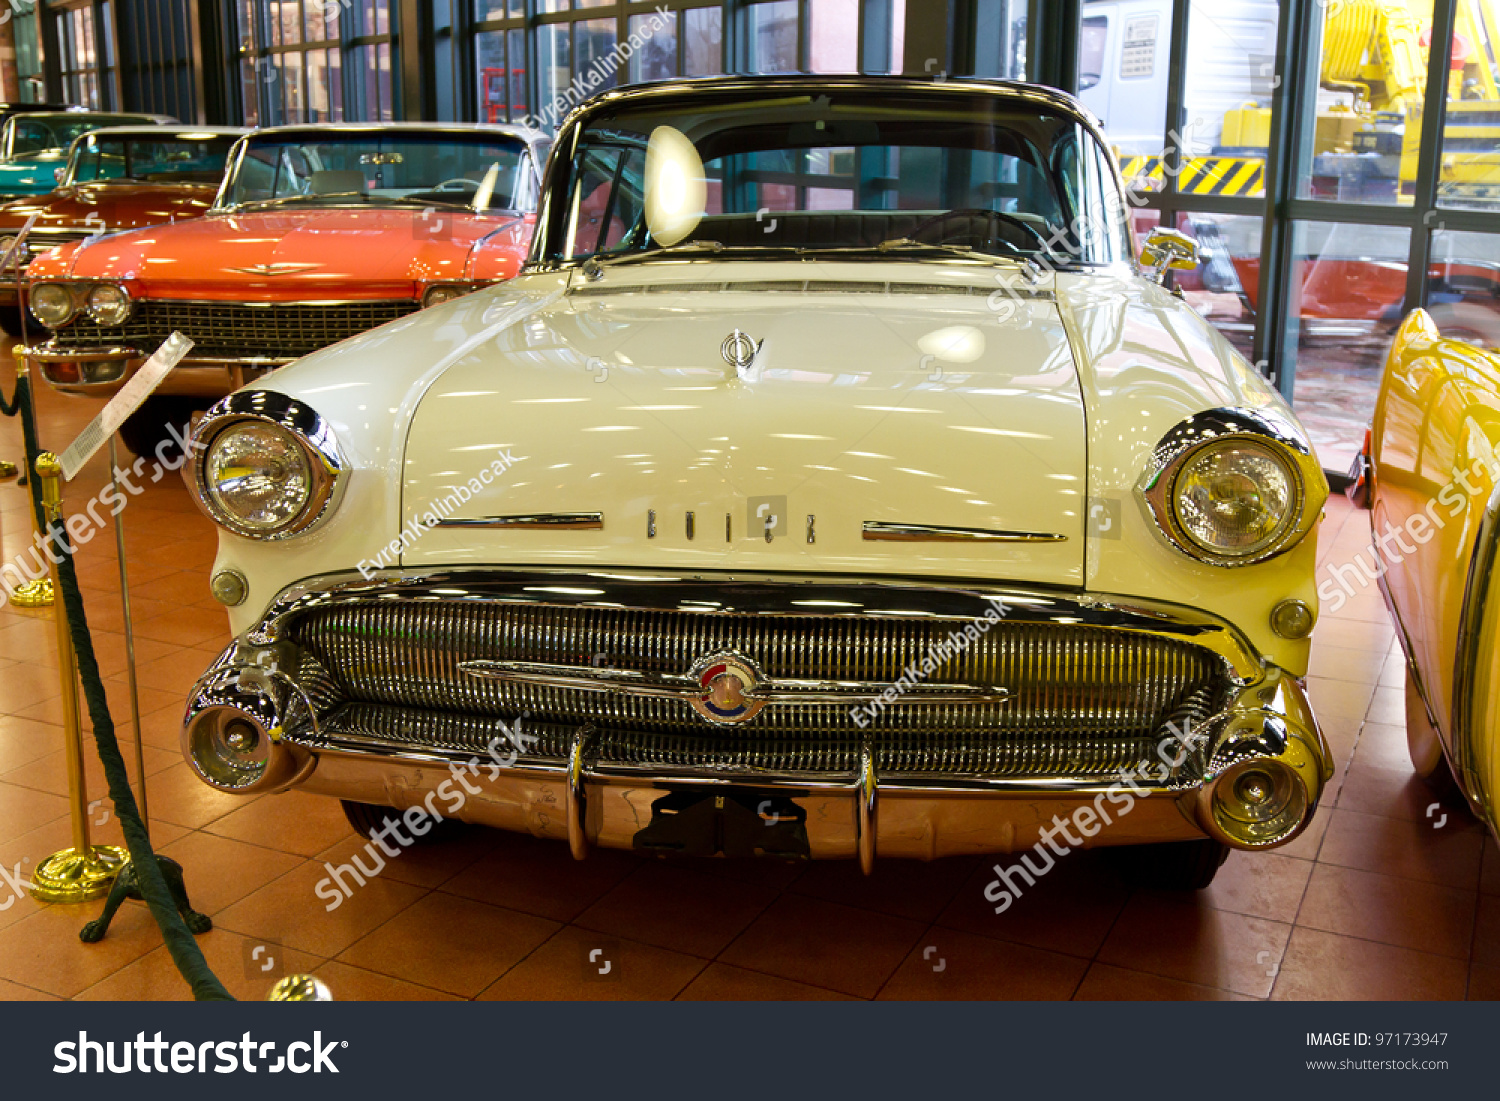 istanbul february 11 1957 buick special stock photo edit now 97173947 shutterstock